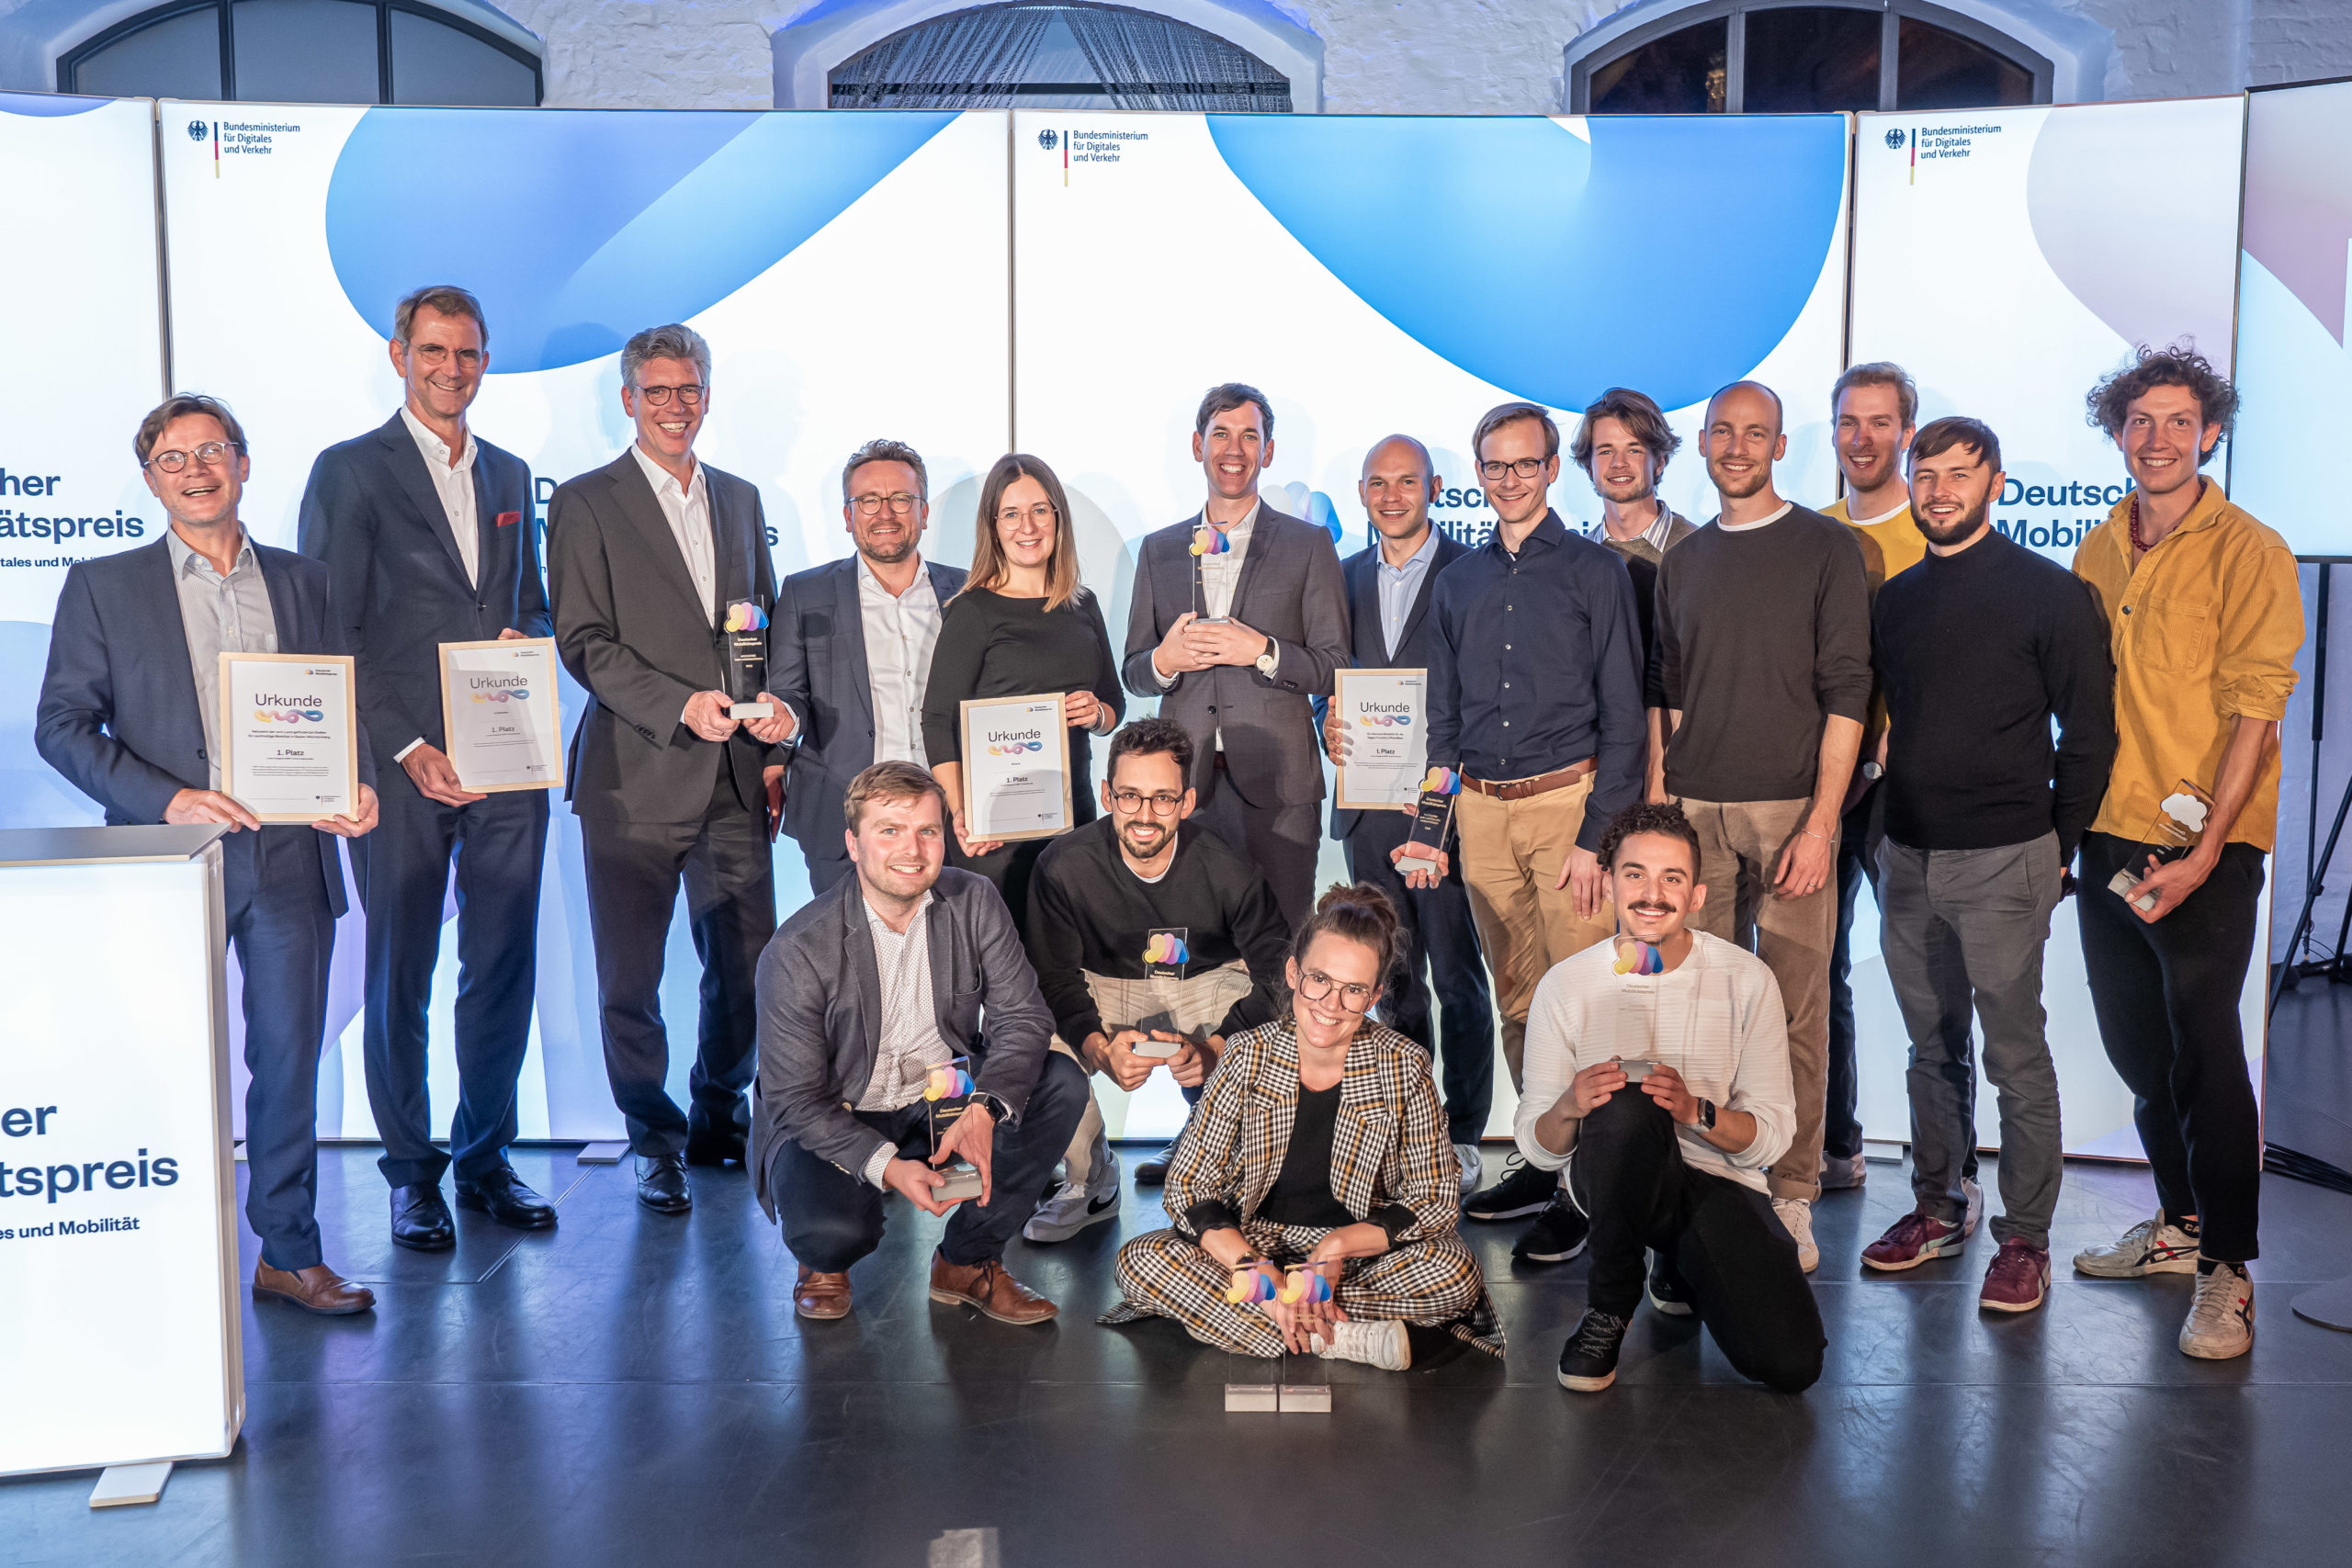 The winners of the German Mobility Award 2022